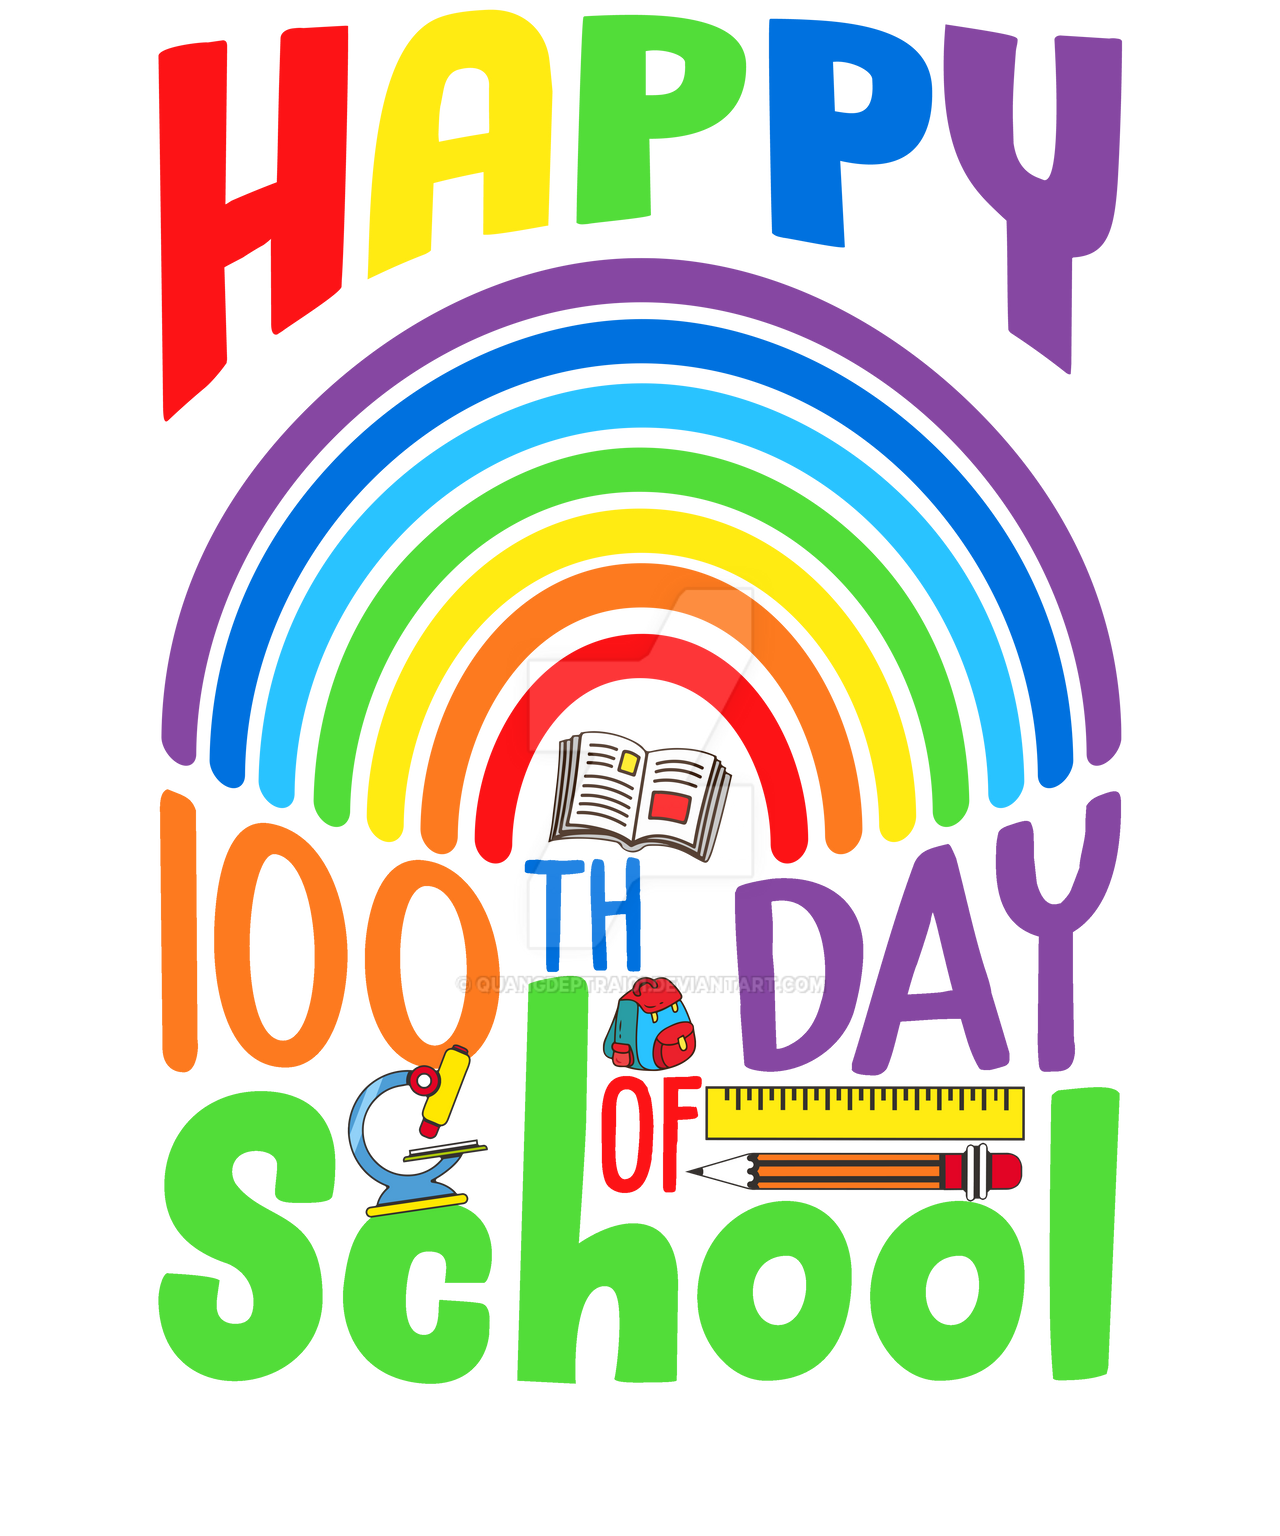 Happy 100th Day by QuangDepTrai01 on DeviantArt